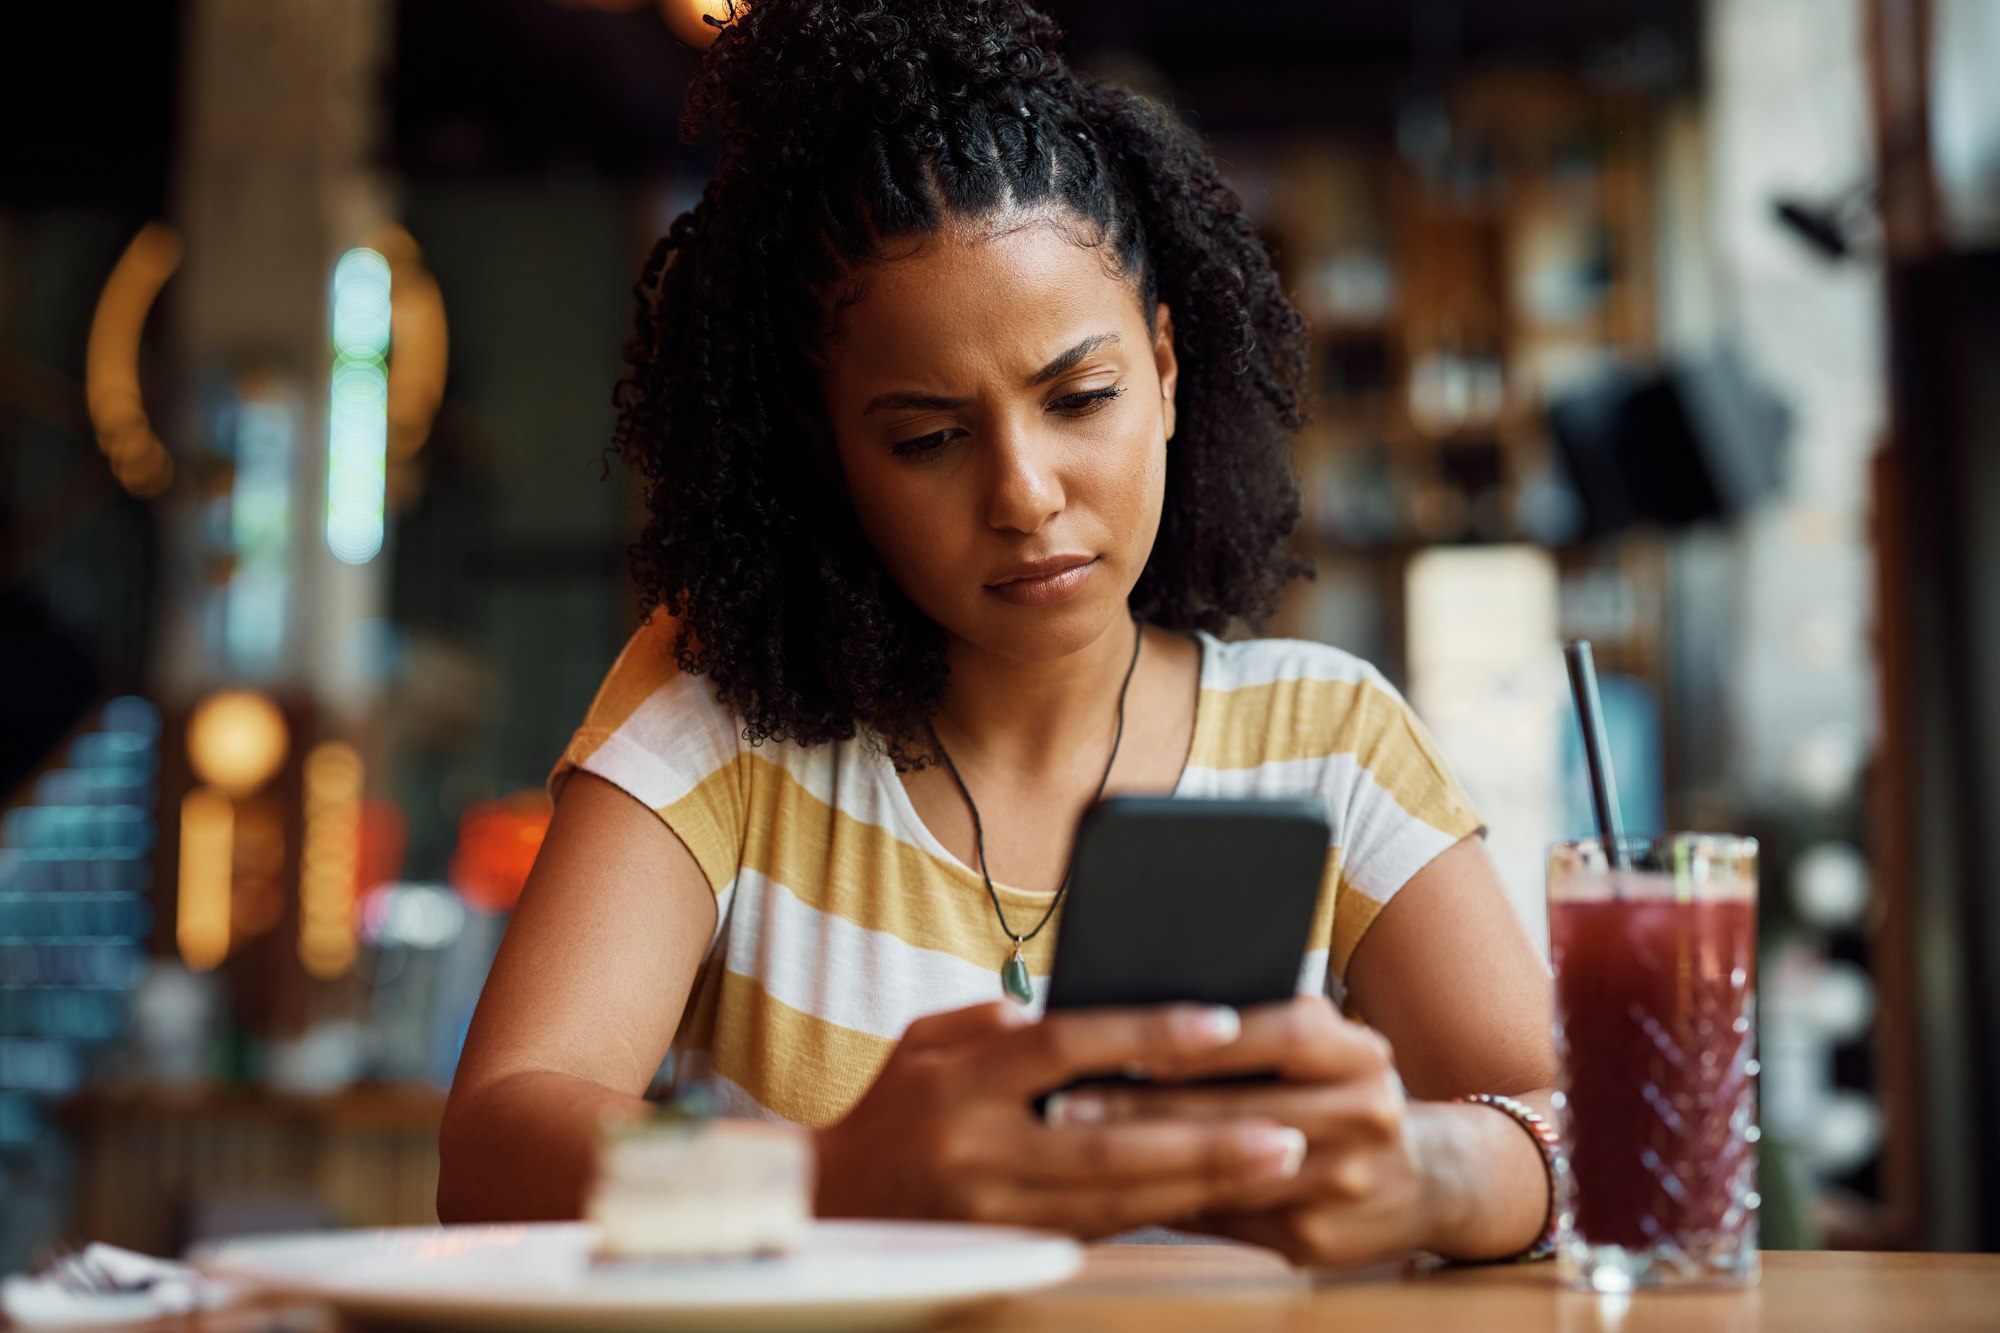 Distraught African American woman reading text message on mobile phone in a cafe.